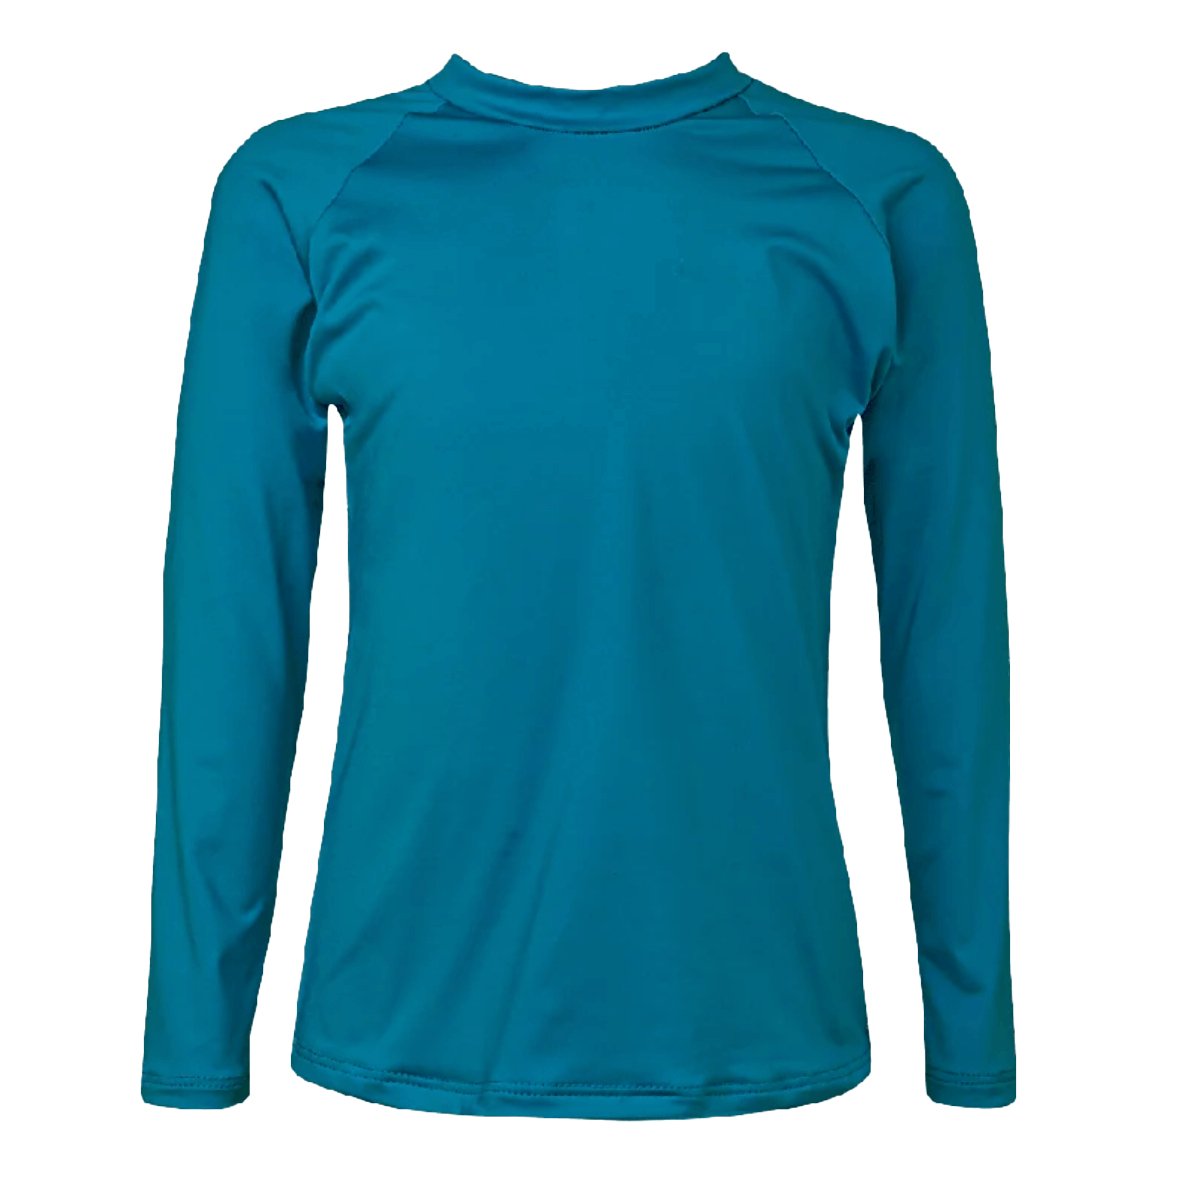 Teal blue rashguard for all outside adventures. This is the front of the lightweight top is shown over a white background.